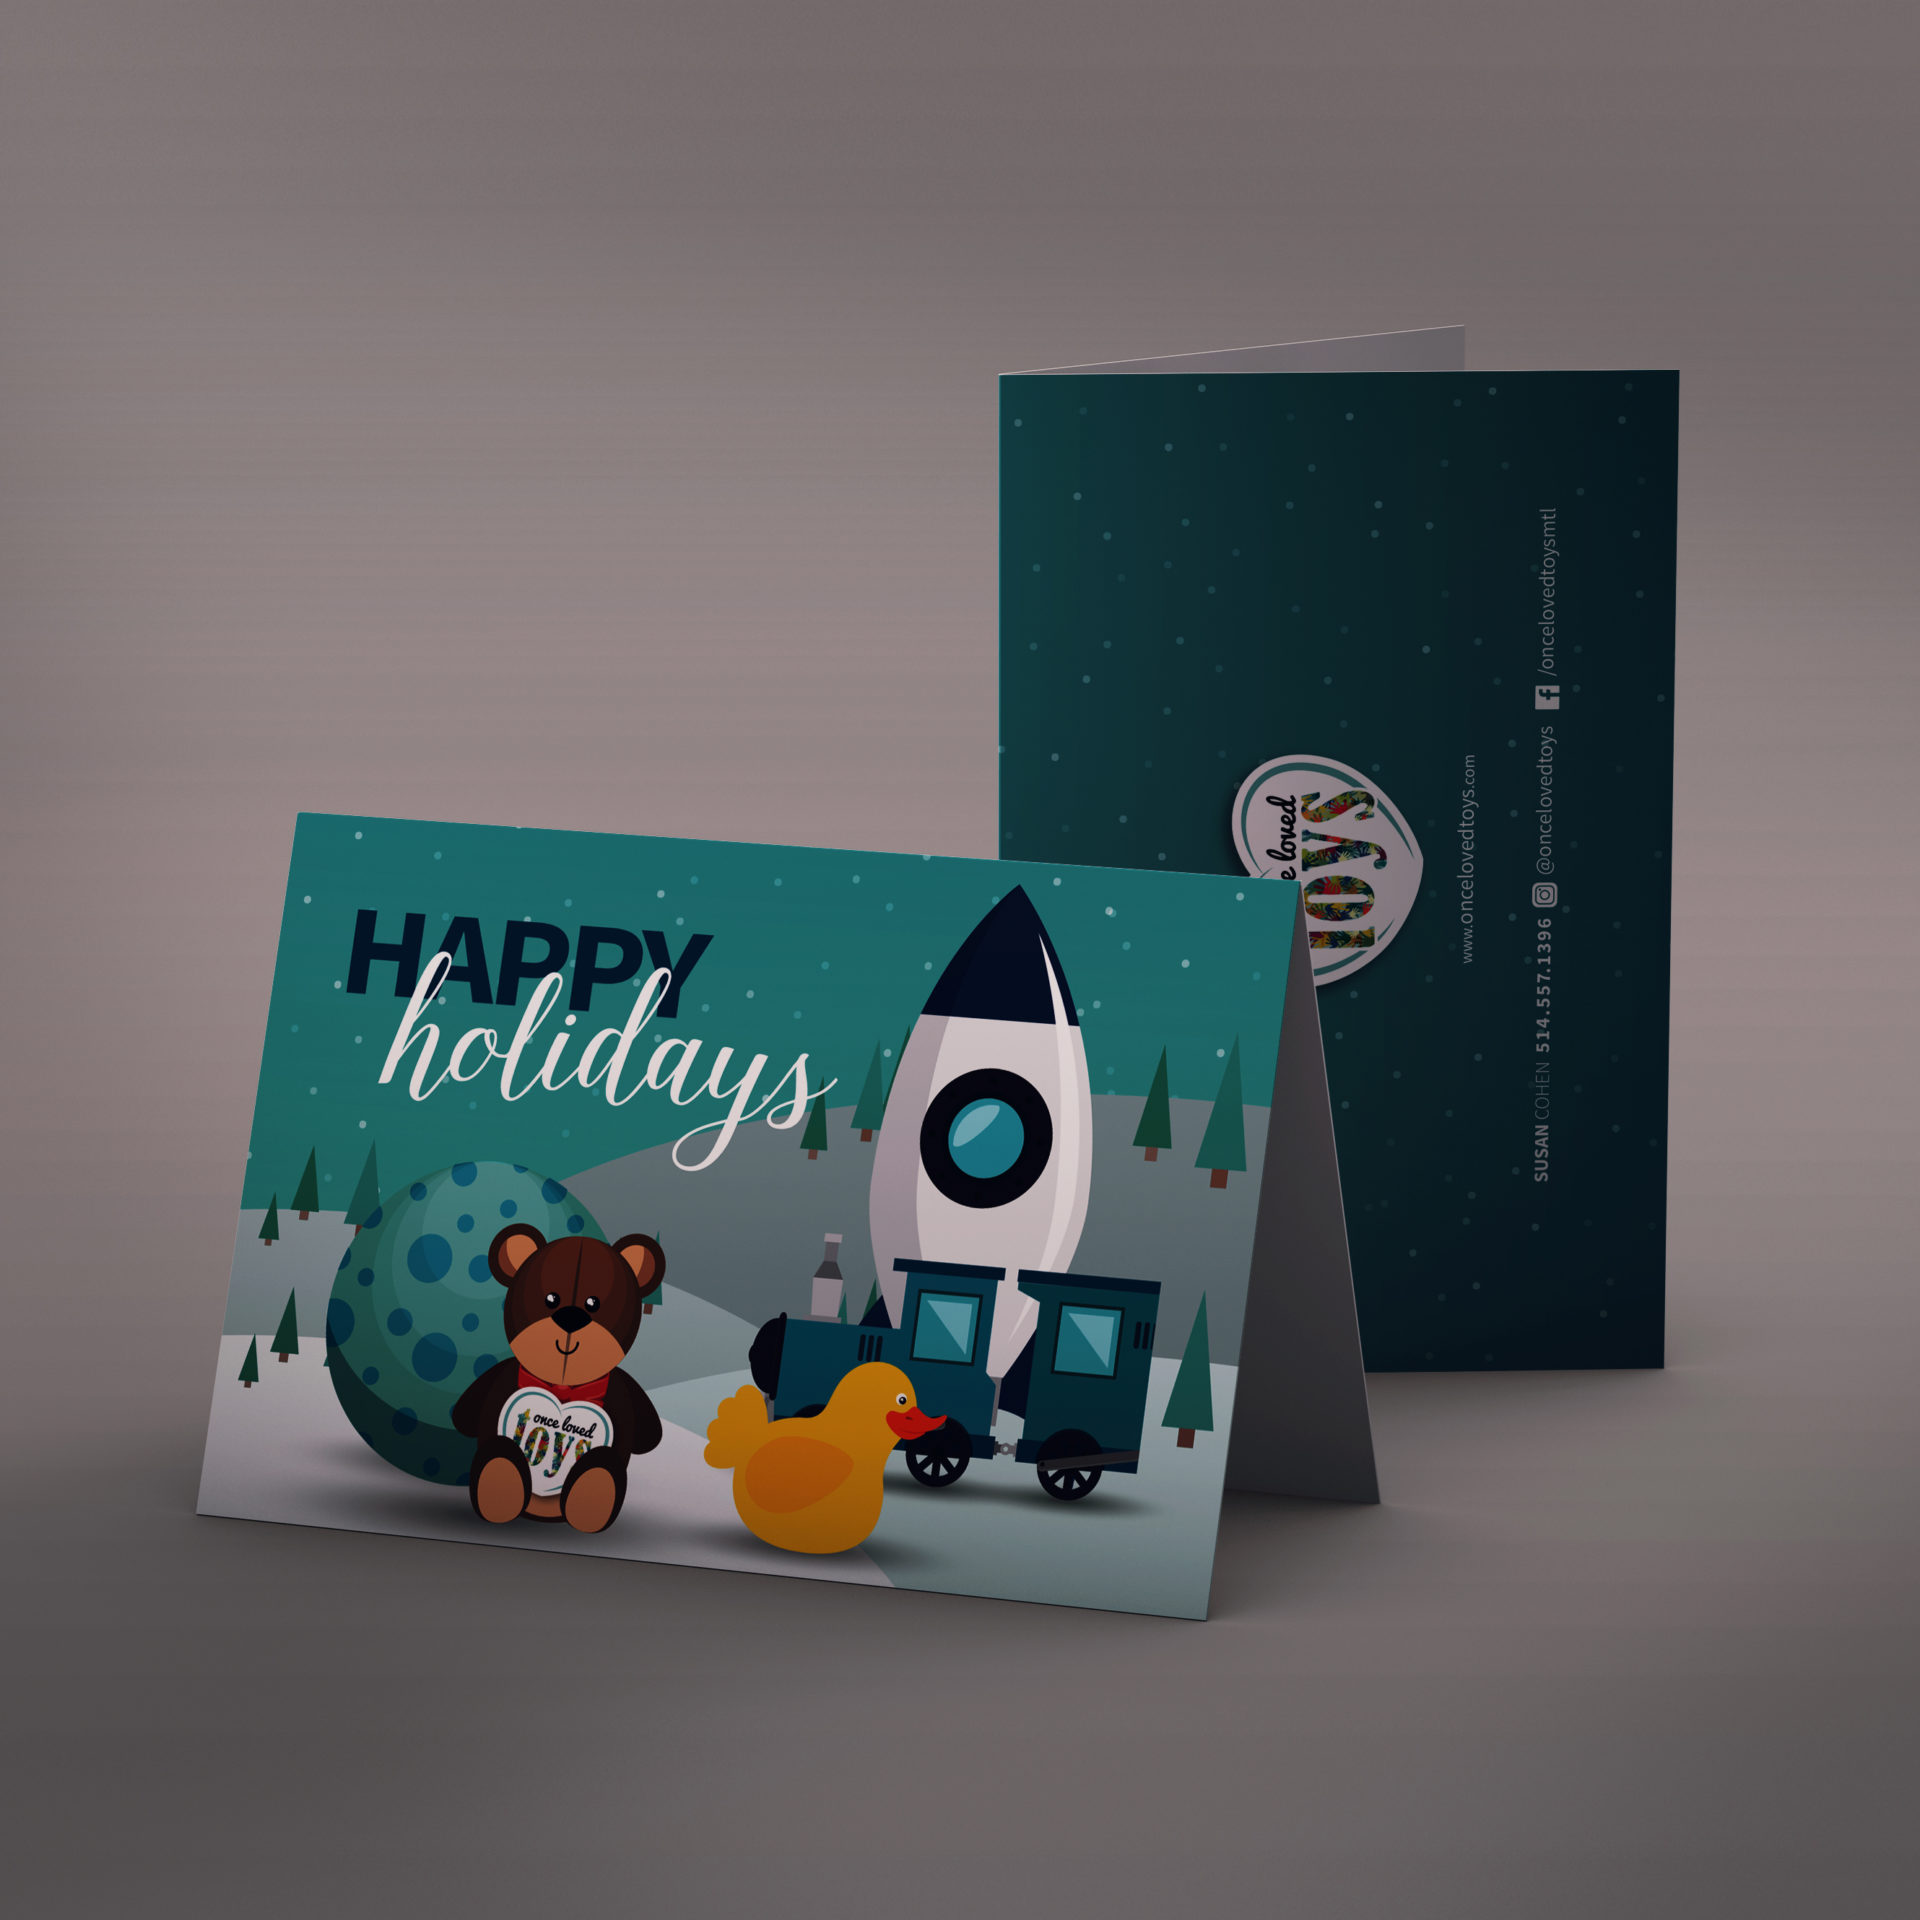 Holiday greeting card with illustration of toys (Rubber ducky, stuffed animal, train cart) in the snow with the words 'Happy Holidays'.